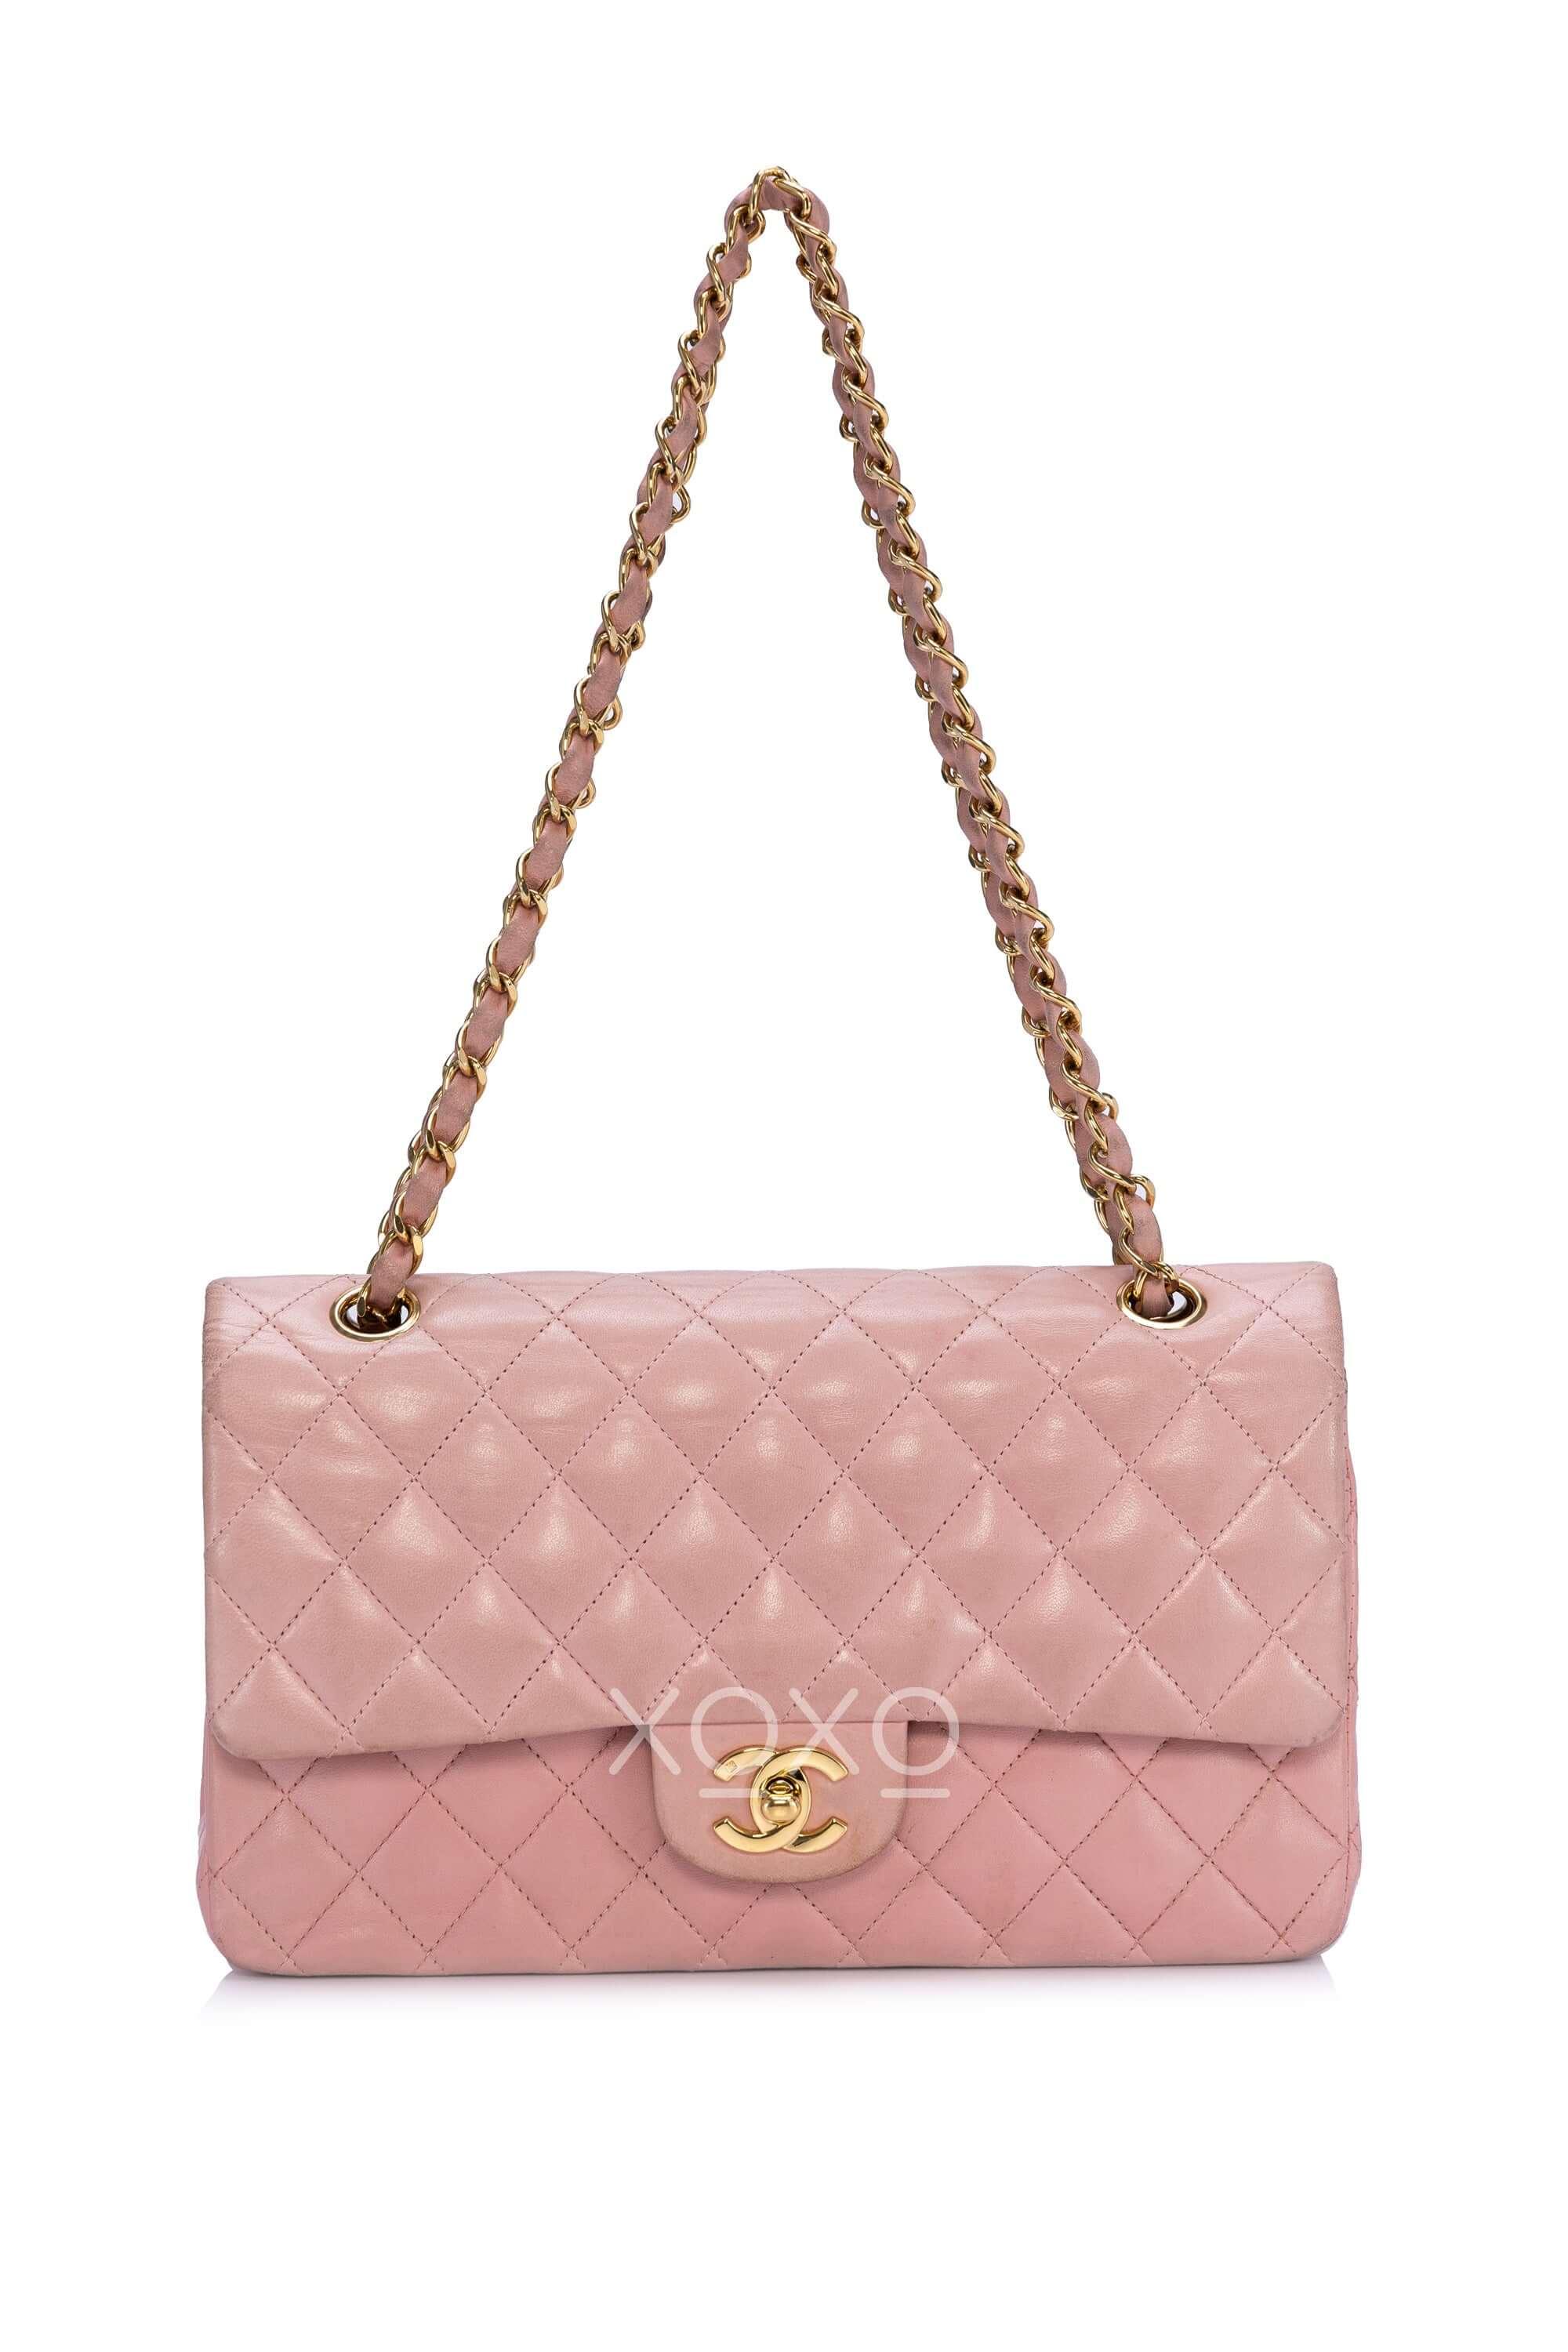 Chanel Pink Quilted Caviar Classic Medium Double Flap Bag Gold